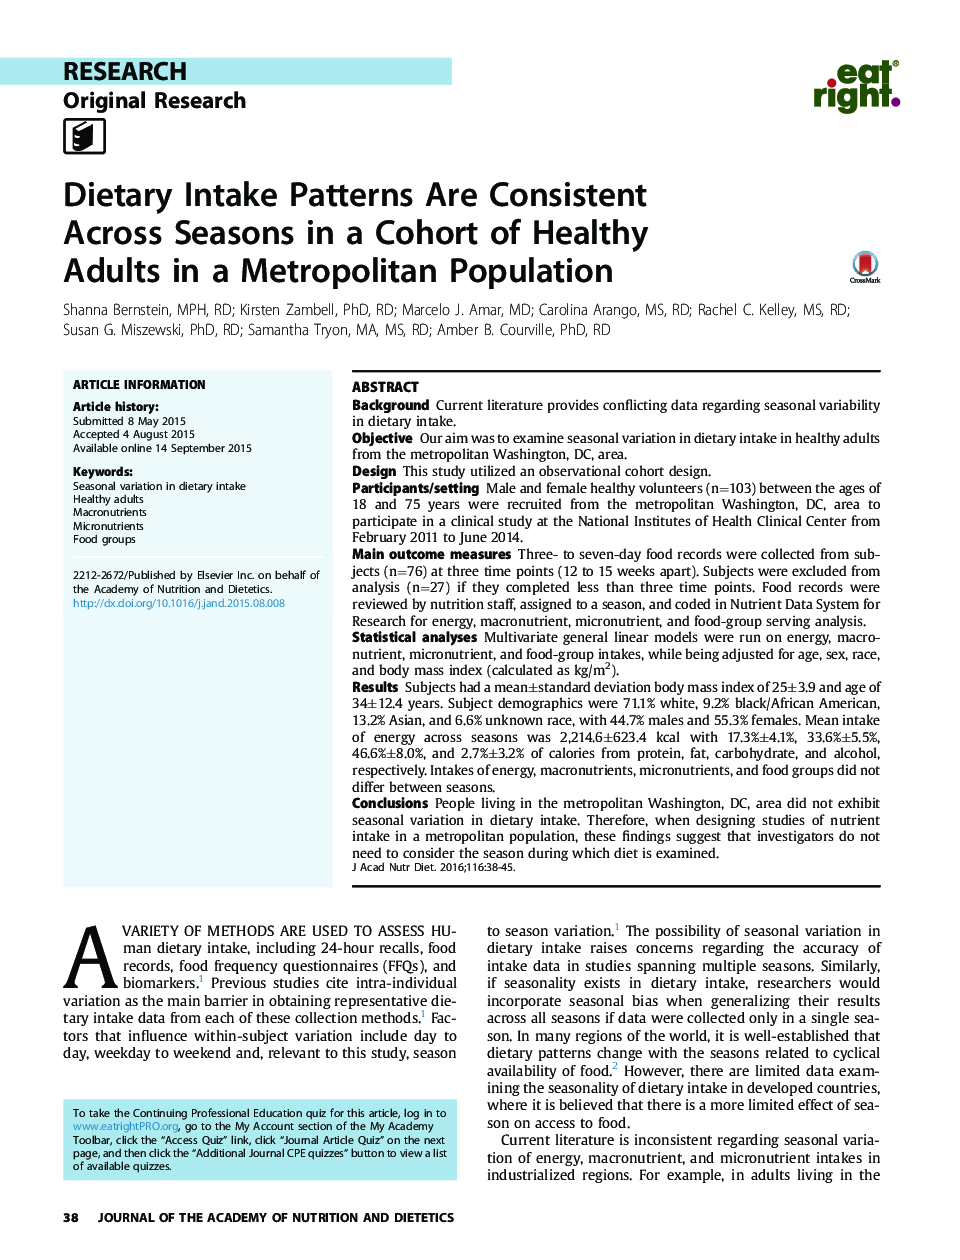 Dietary Intake Patterns Are Consistent Across Seasons in a Cohort of Healthy Adults in a Metropolitan Population 